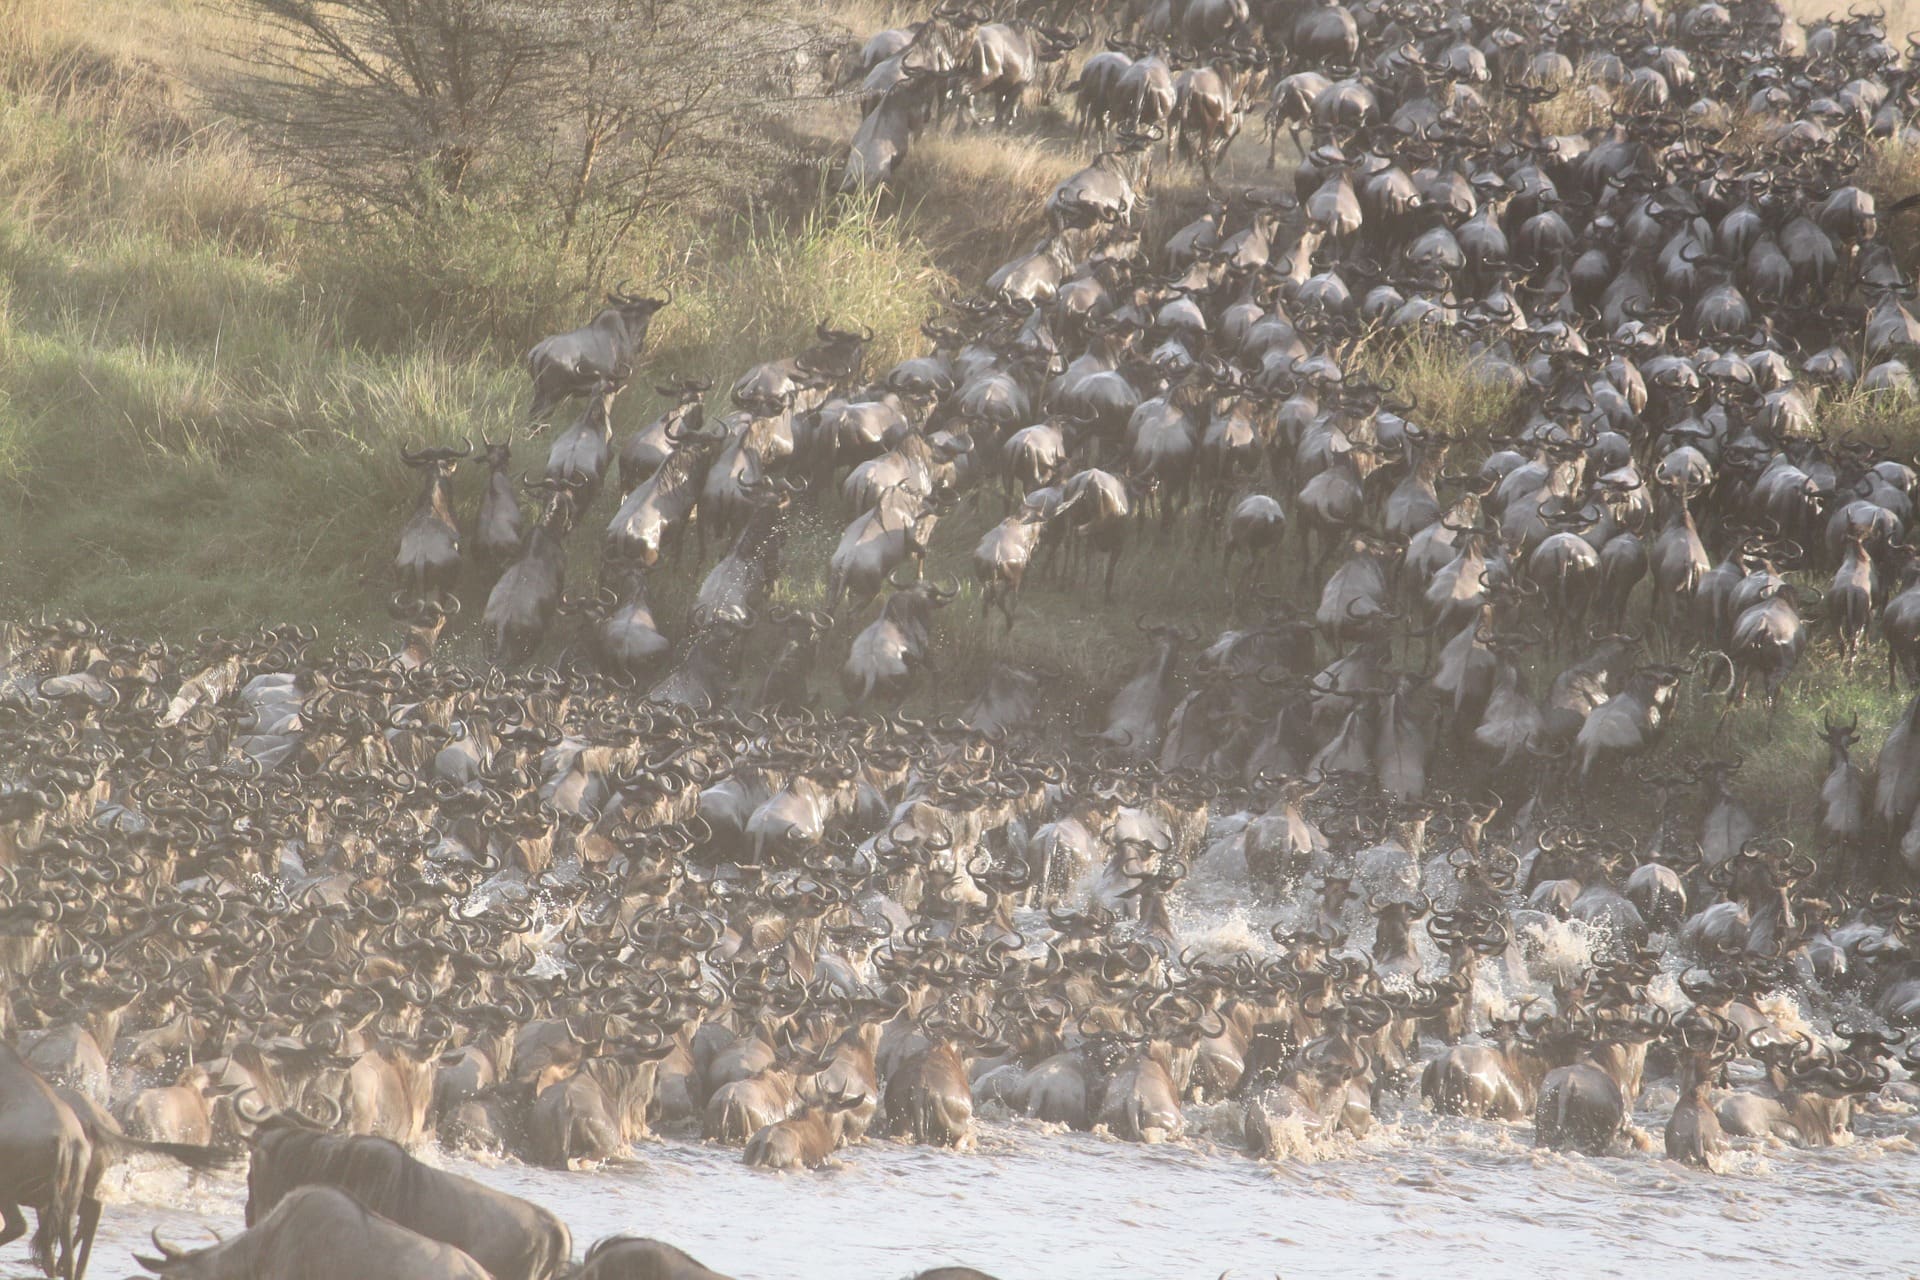 Wildebeests crossing a river during the great migration 